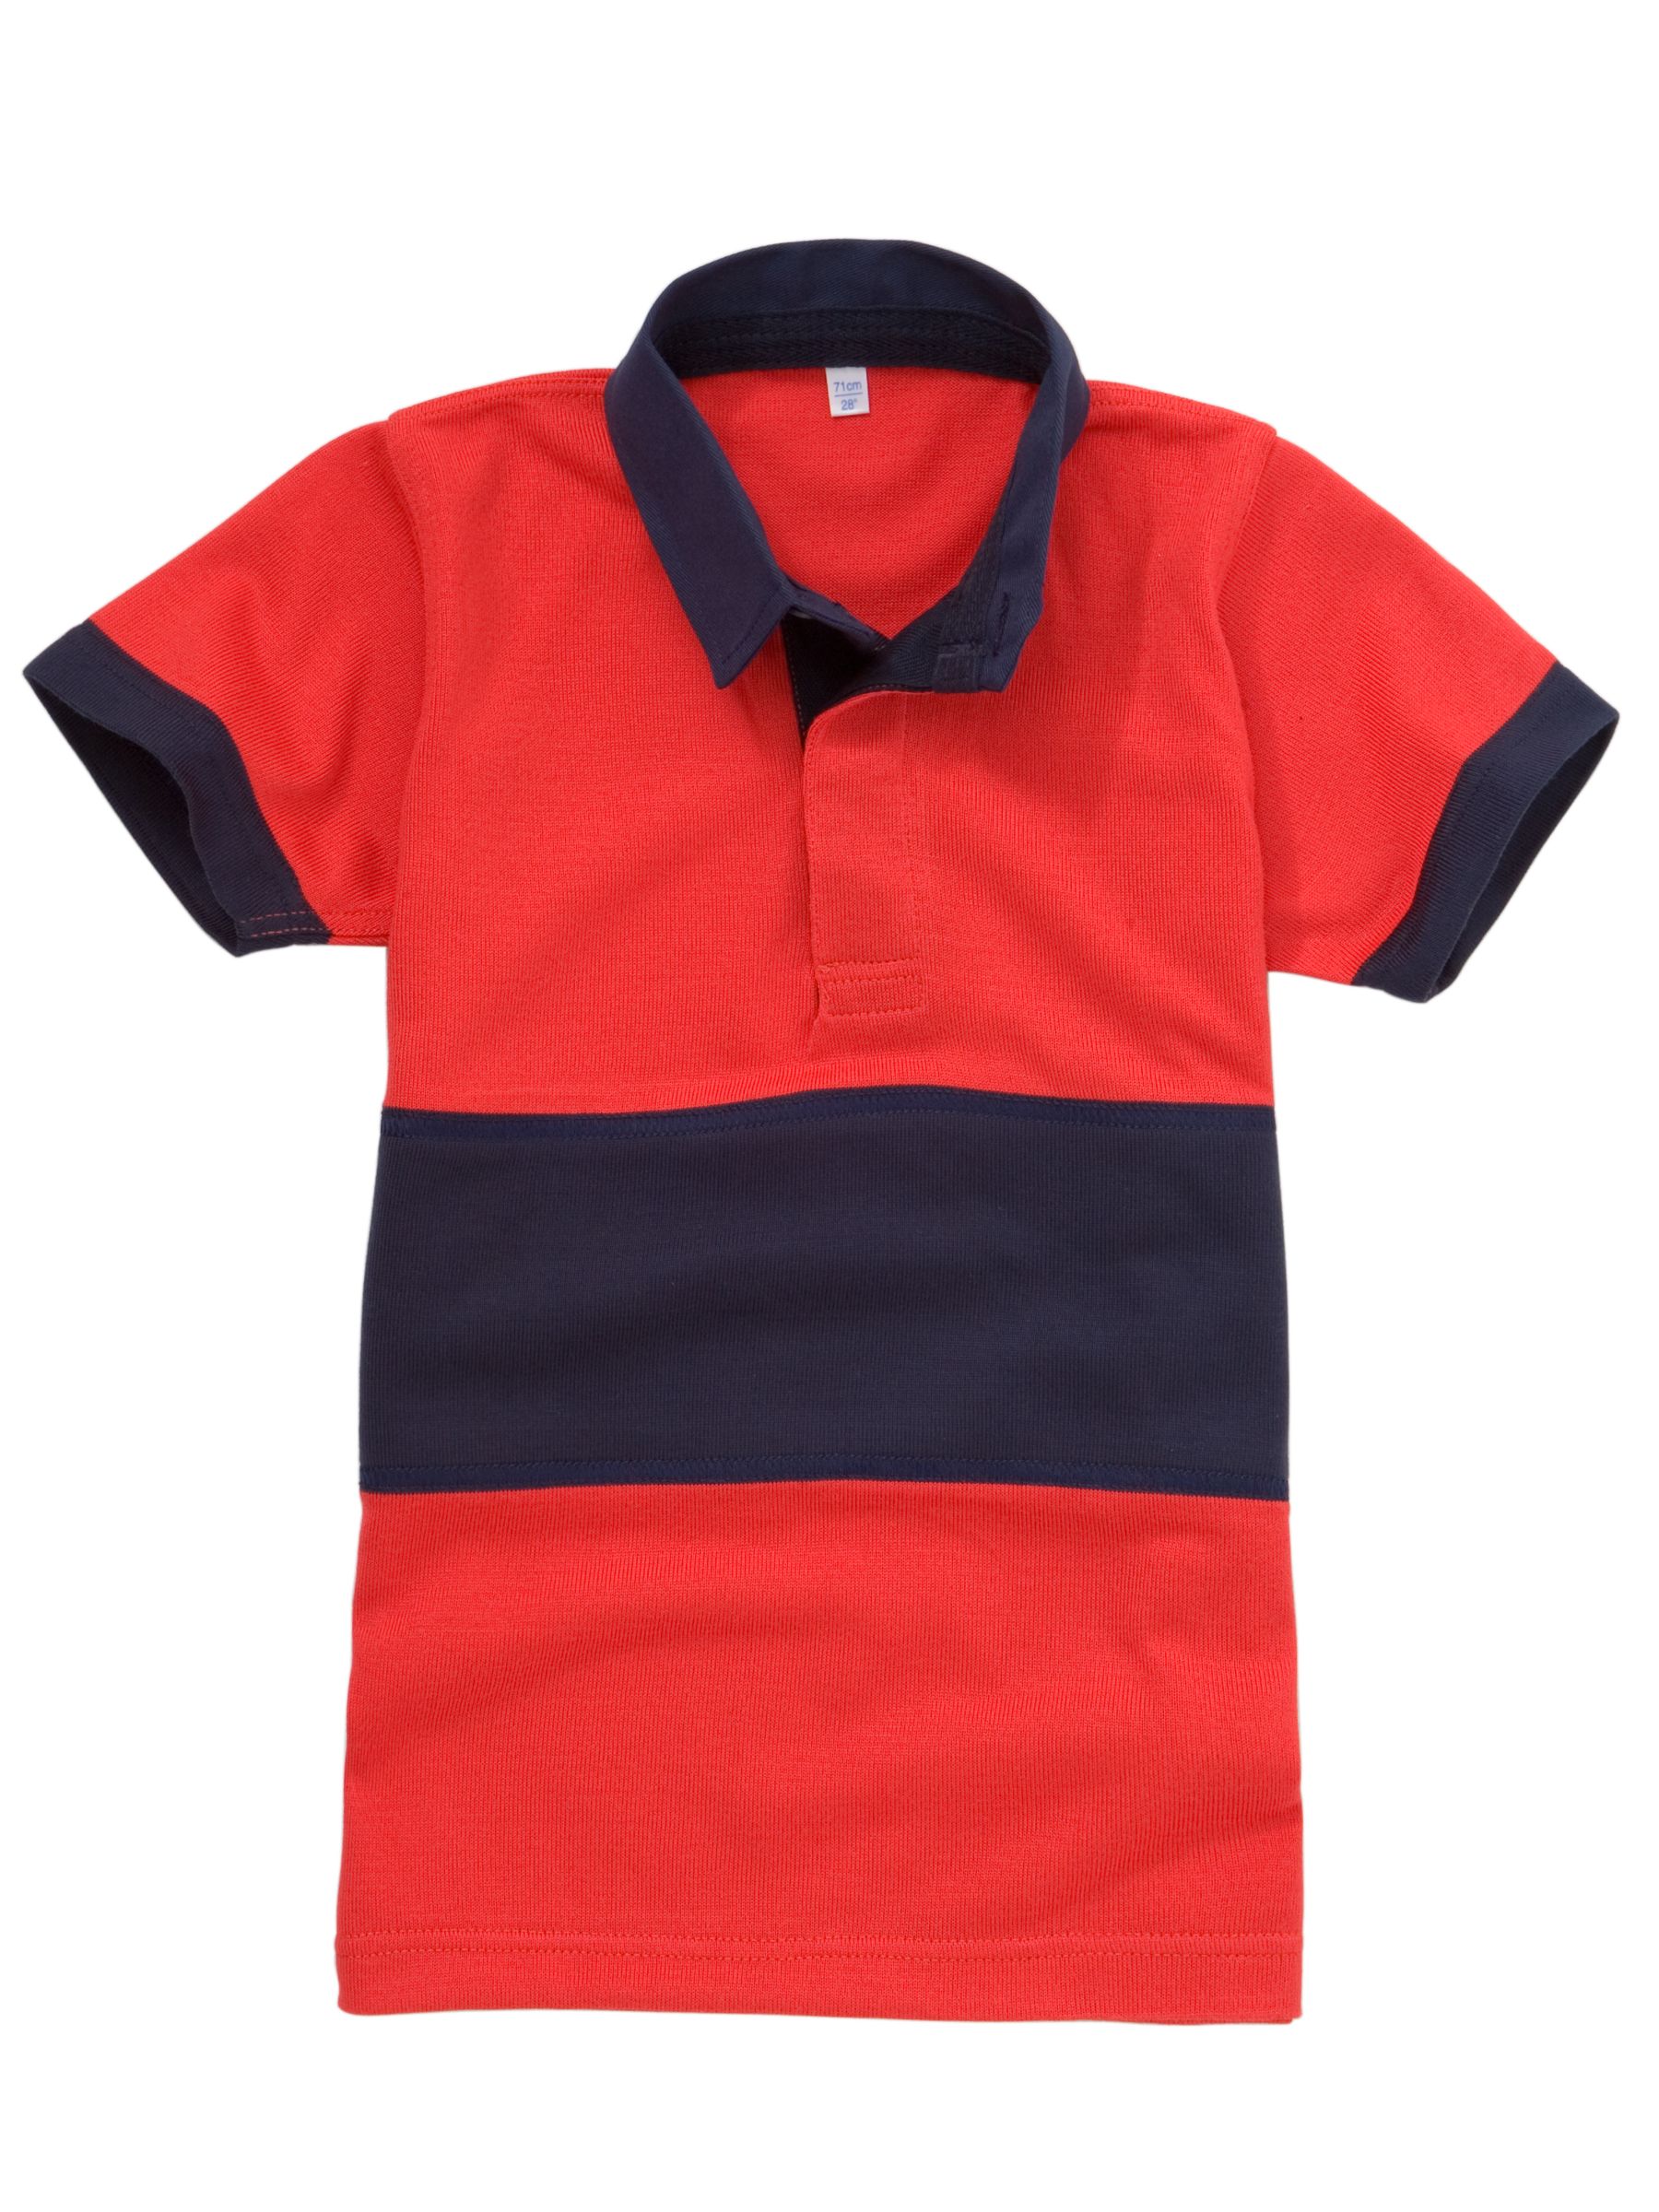 Other Schools School Boys Rugby Shirt, Red/navy